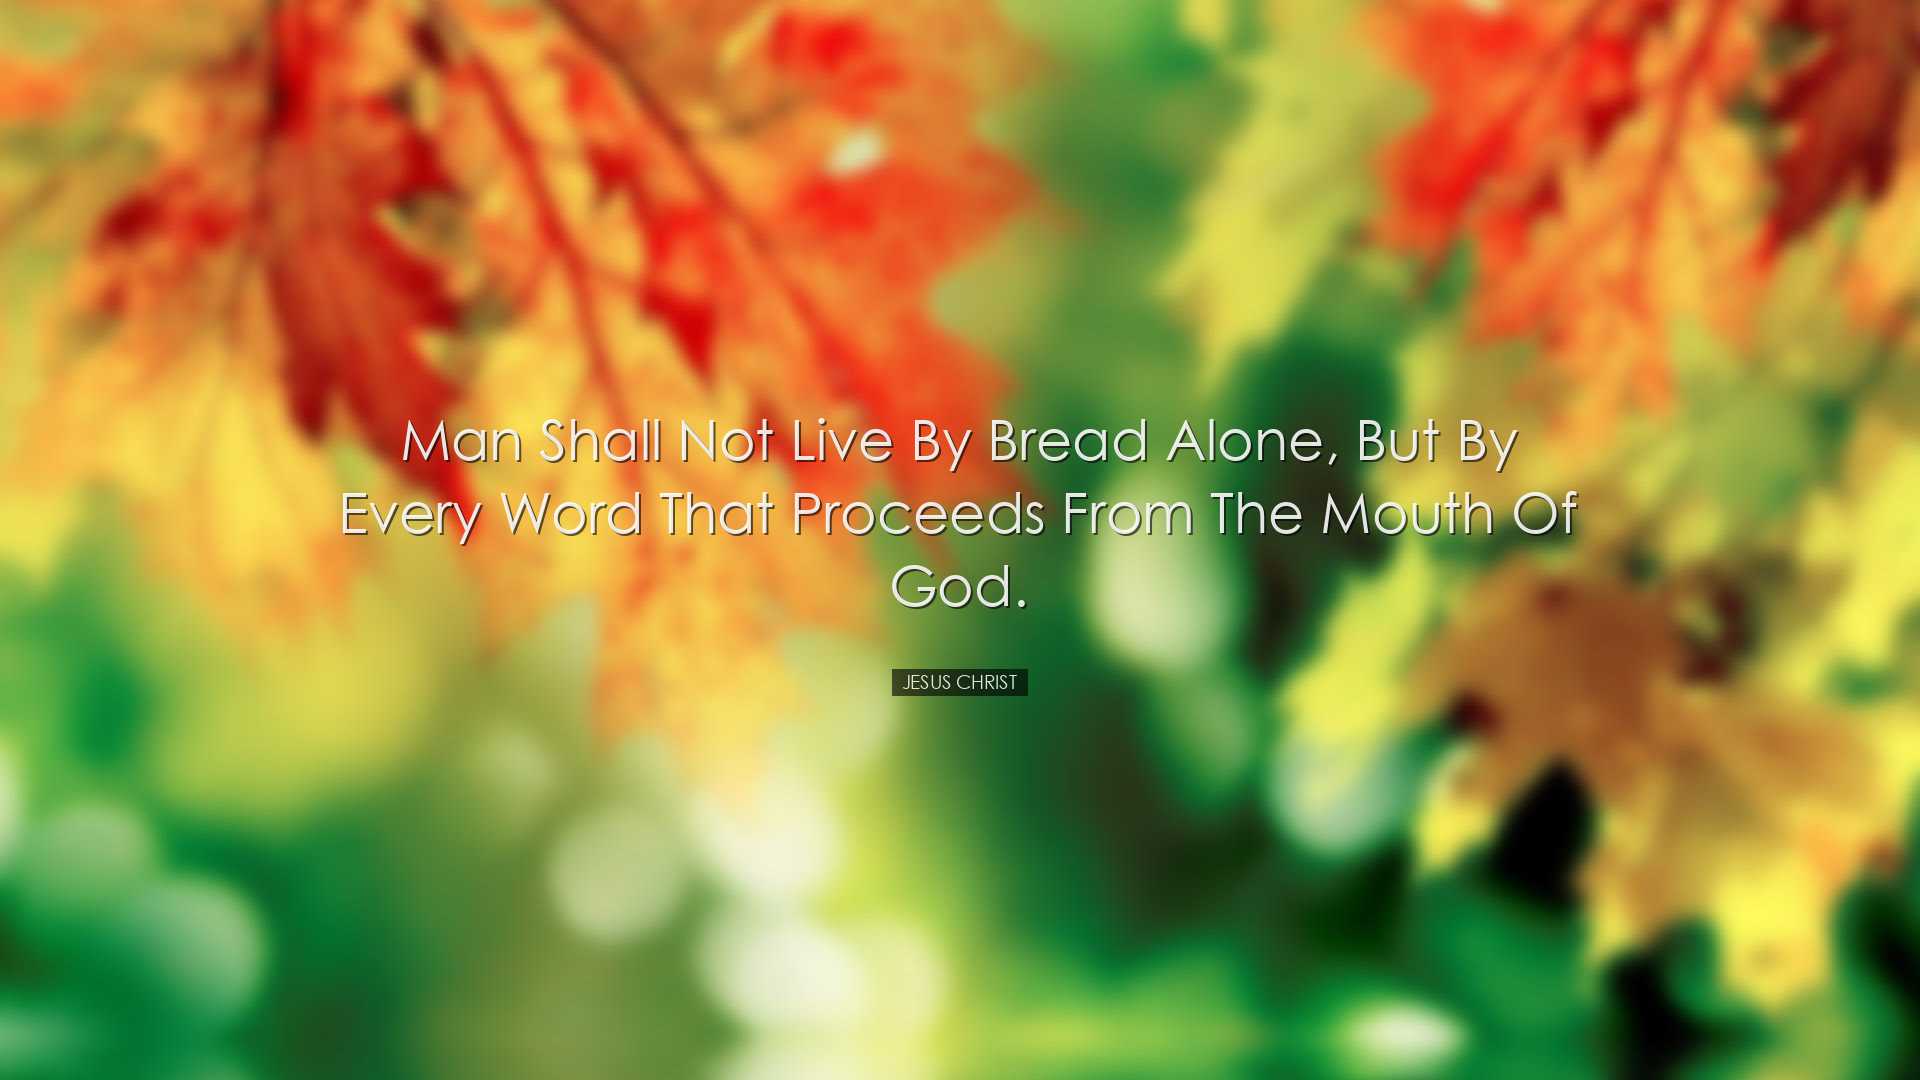 Man shall not live by bread alone, but by every word that proceeds